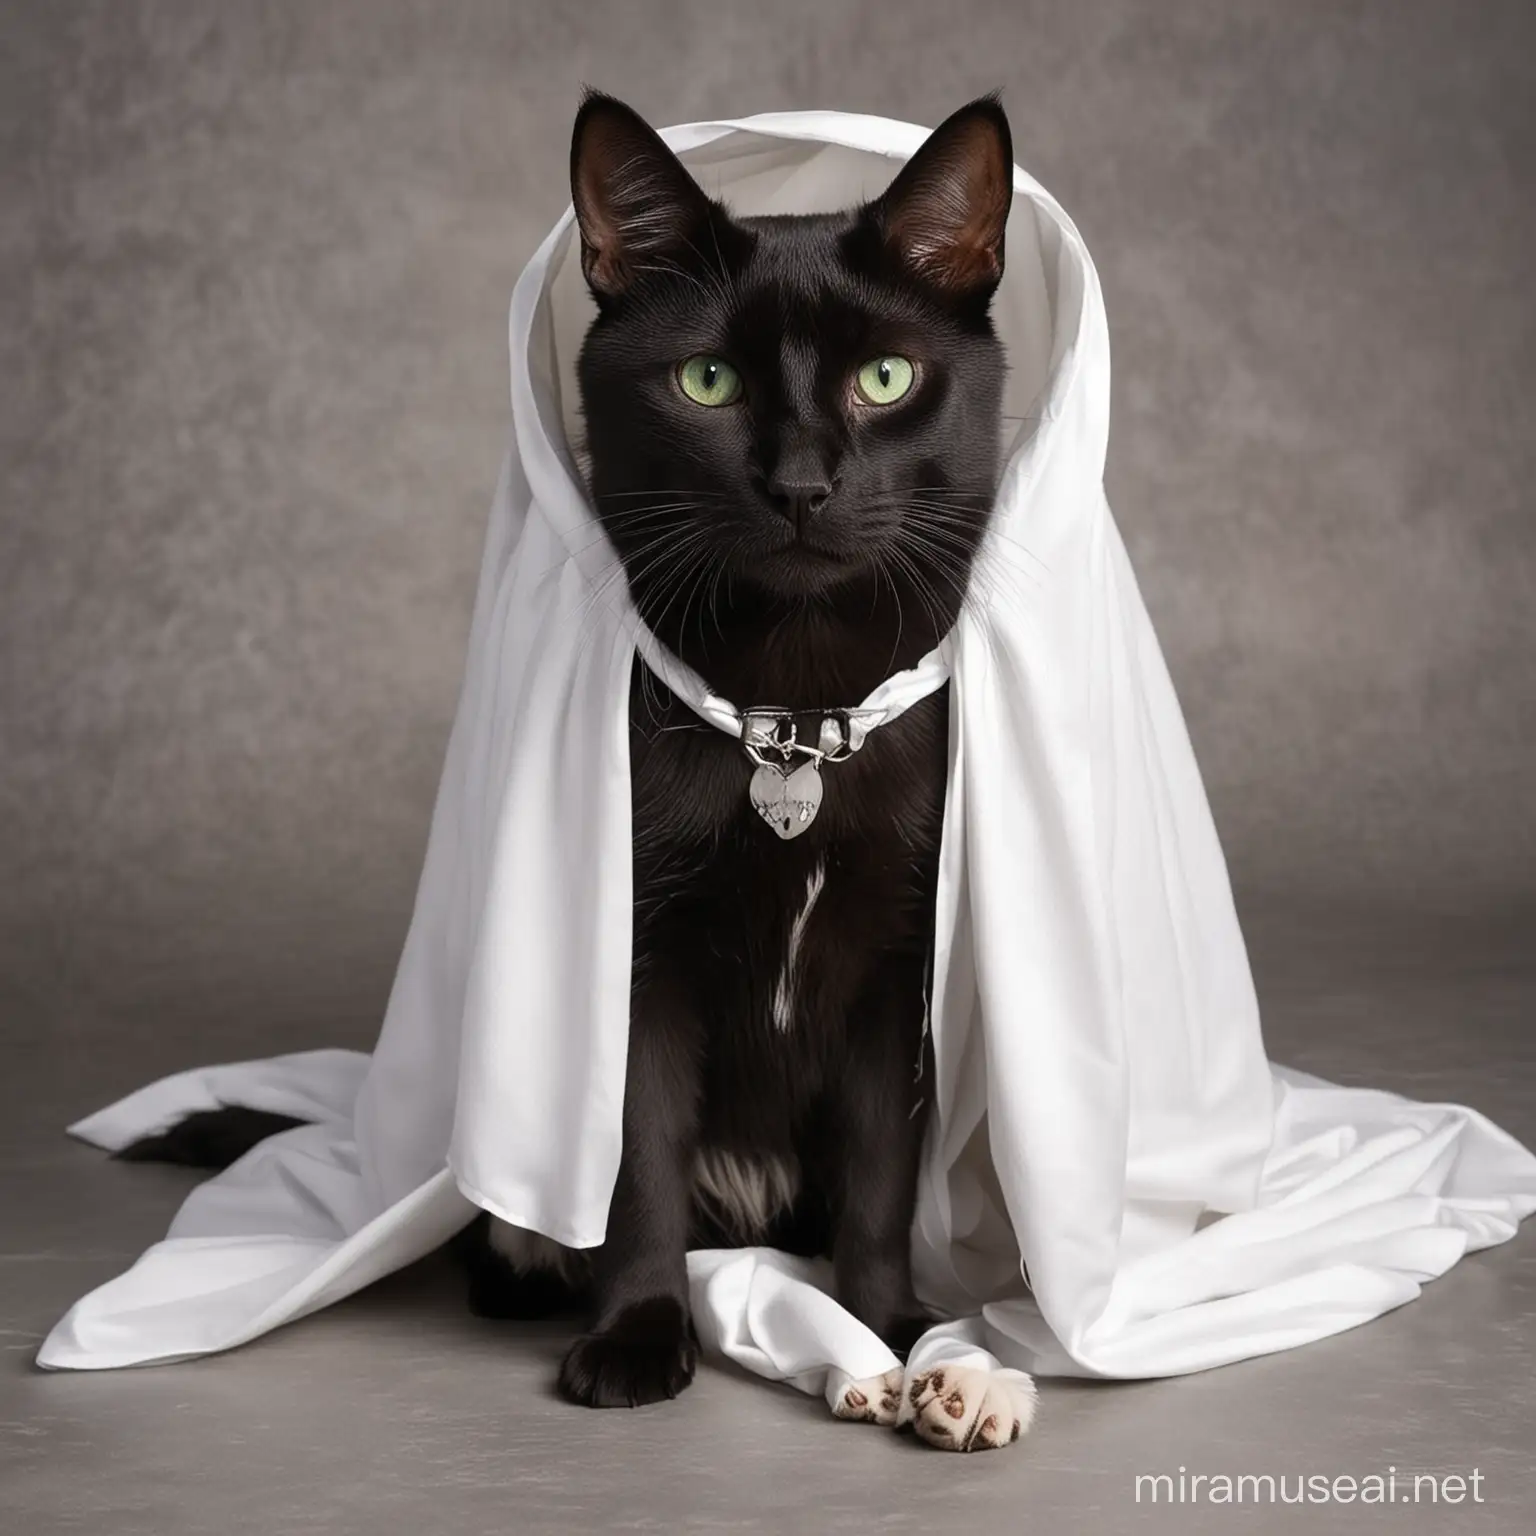 Mysterious Black Cat Wearing a White Cape and GreenEyed Dog Body